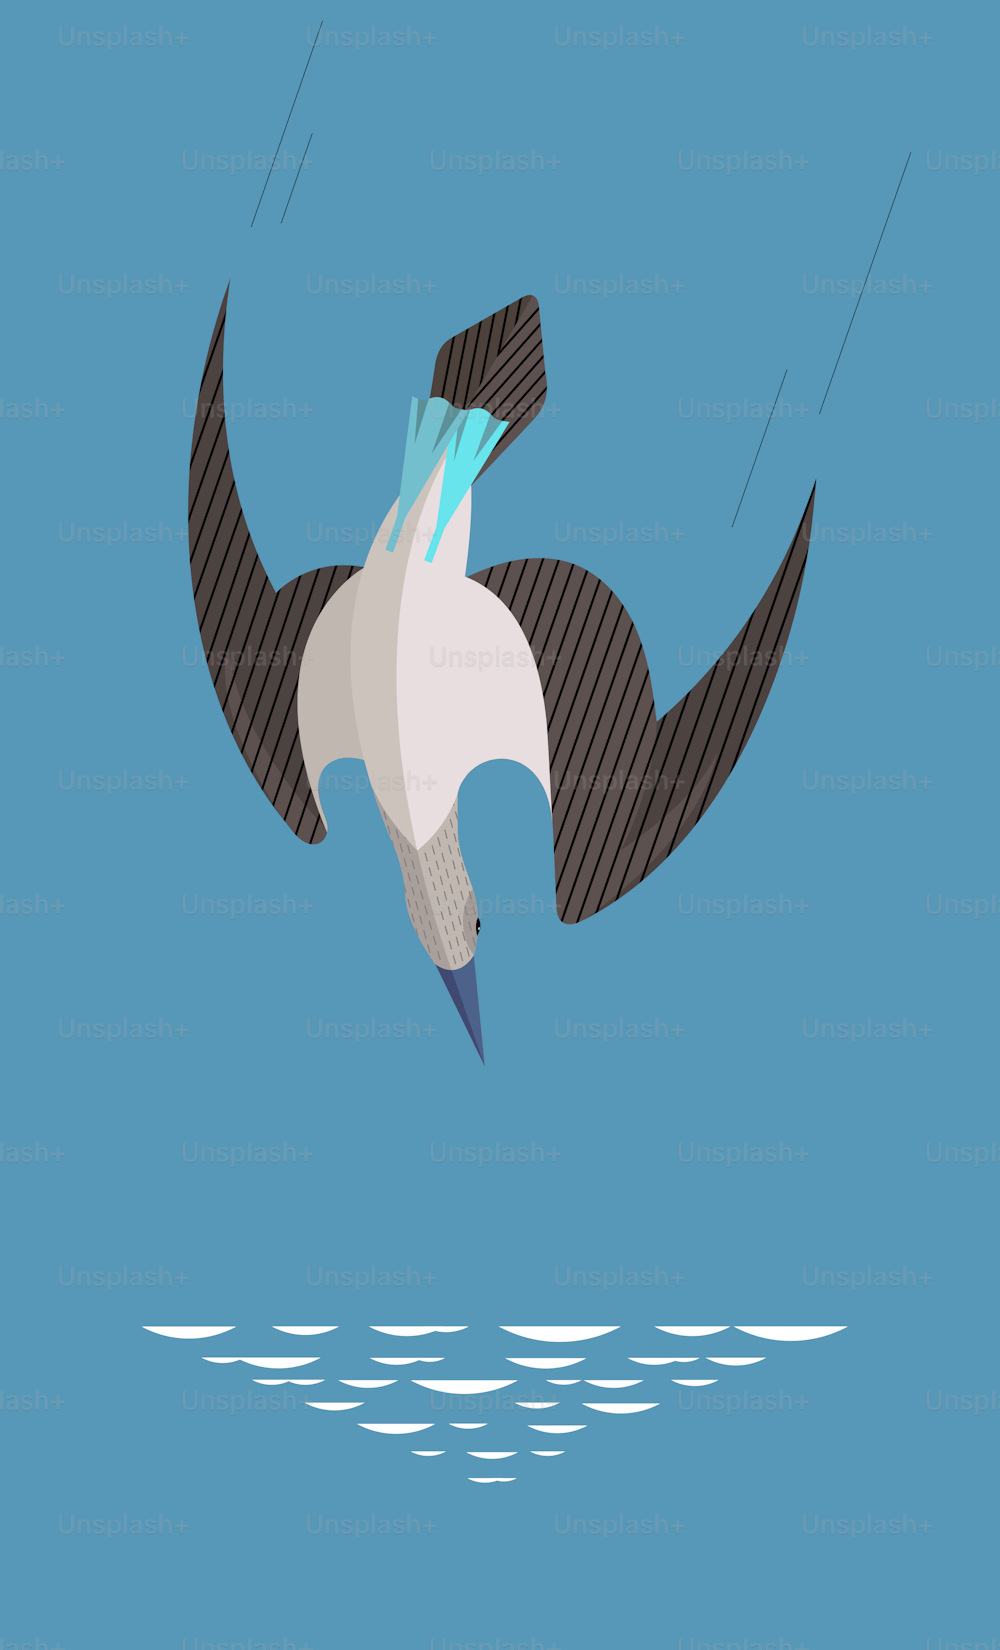 Blue-footed boobies are funny and clumsy on land. But in the air, this bird is a swift hunter, attacking prey with lightning speed. Stylized image.